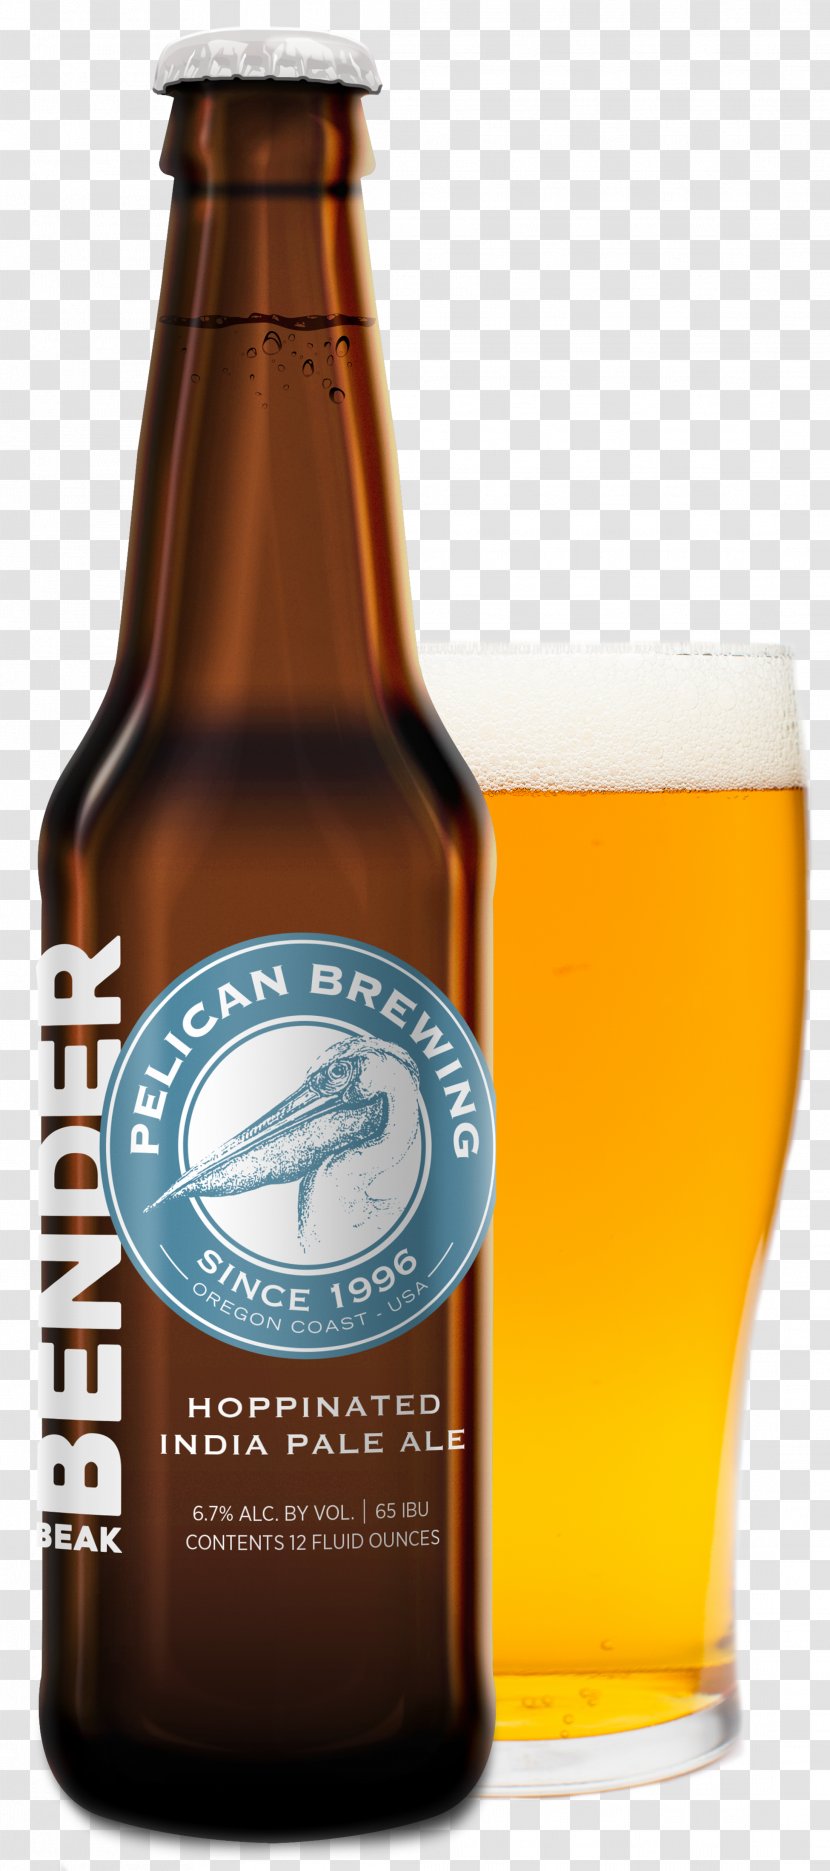 Pelican Brewing India Pale Ale Beer Founders Company - Alcohol By Volume Transparent PNG